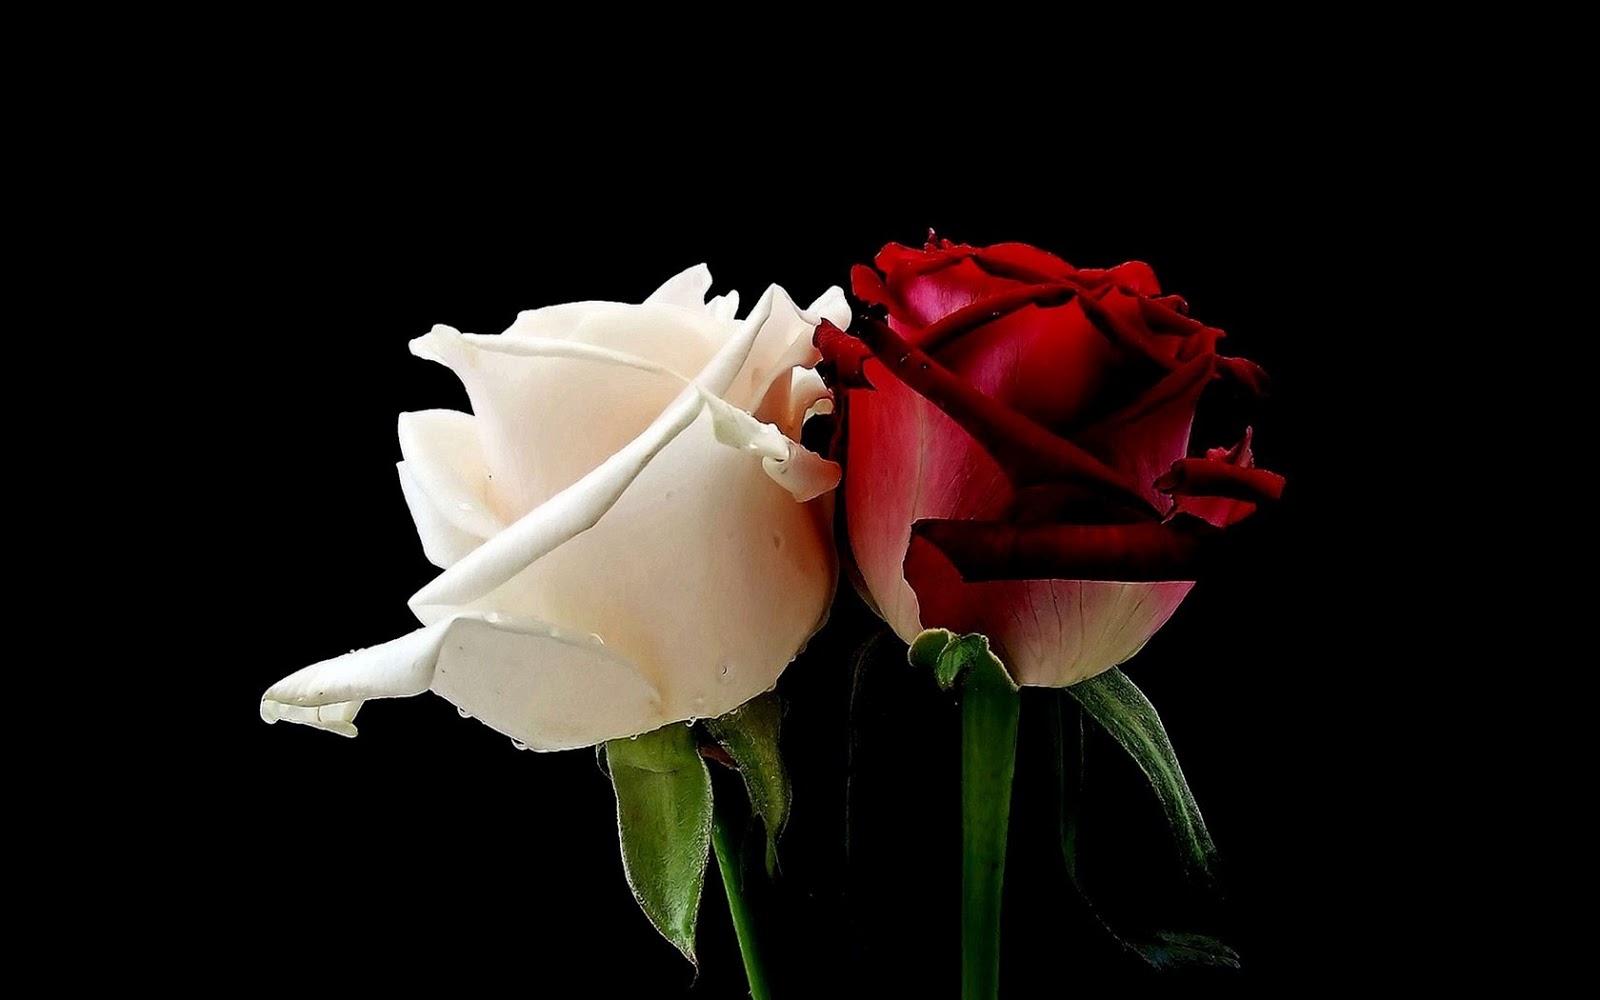 Rose Wallpaper Red Roses Pictures Of